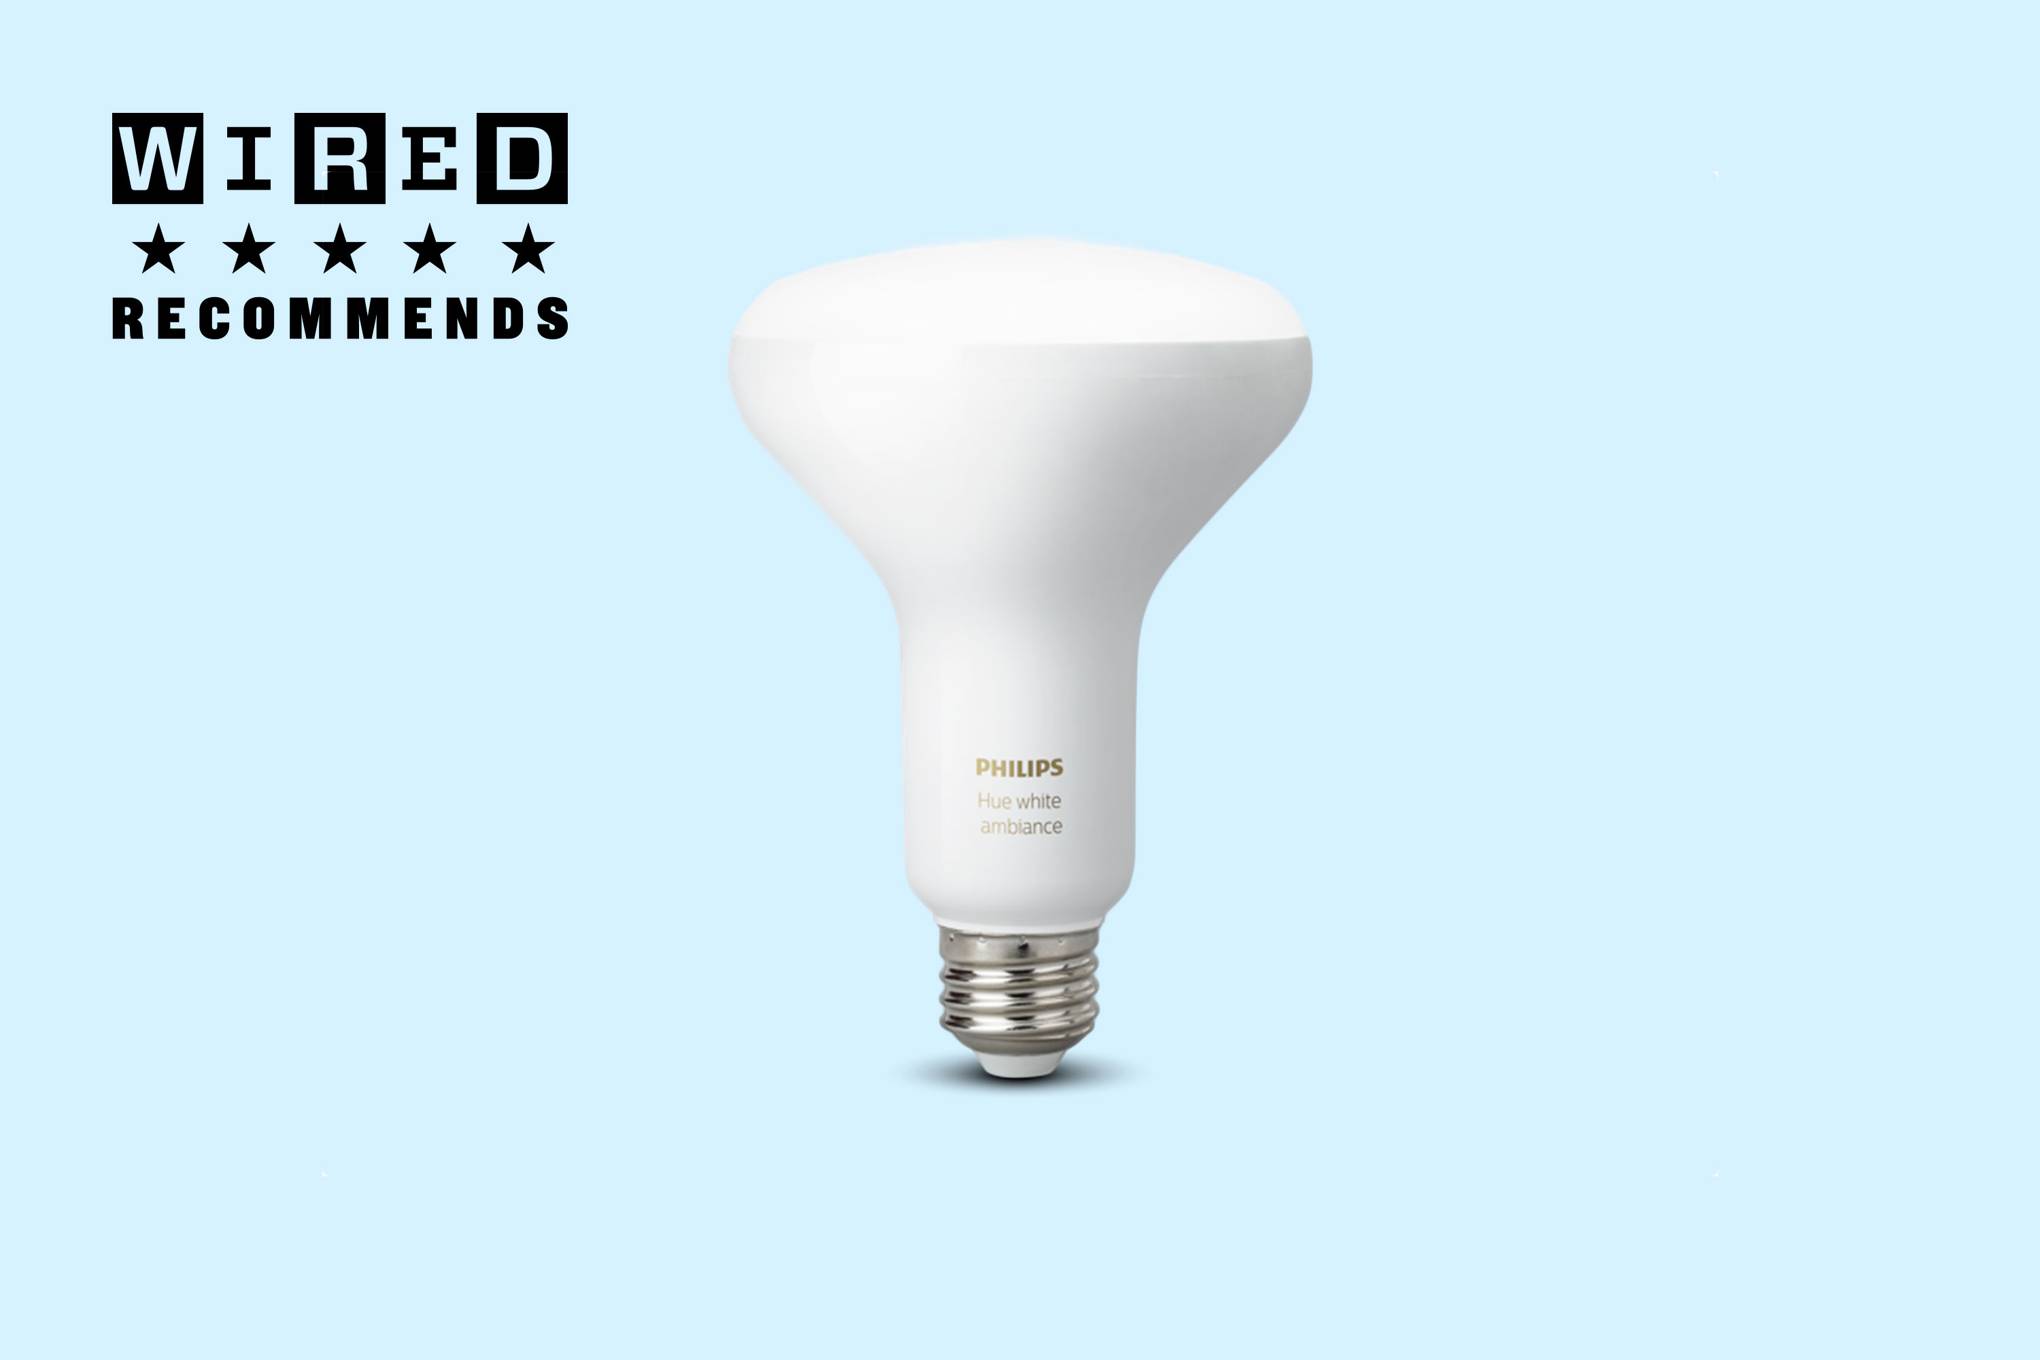 Philips Hue White St19 Led 40w Equivalent Dimmable Wireless Edison Smart Light Bulb With Bluetooth 551788 The Home Depot